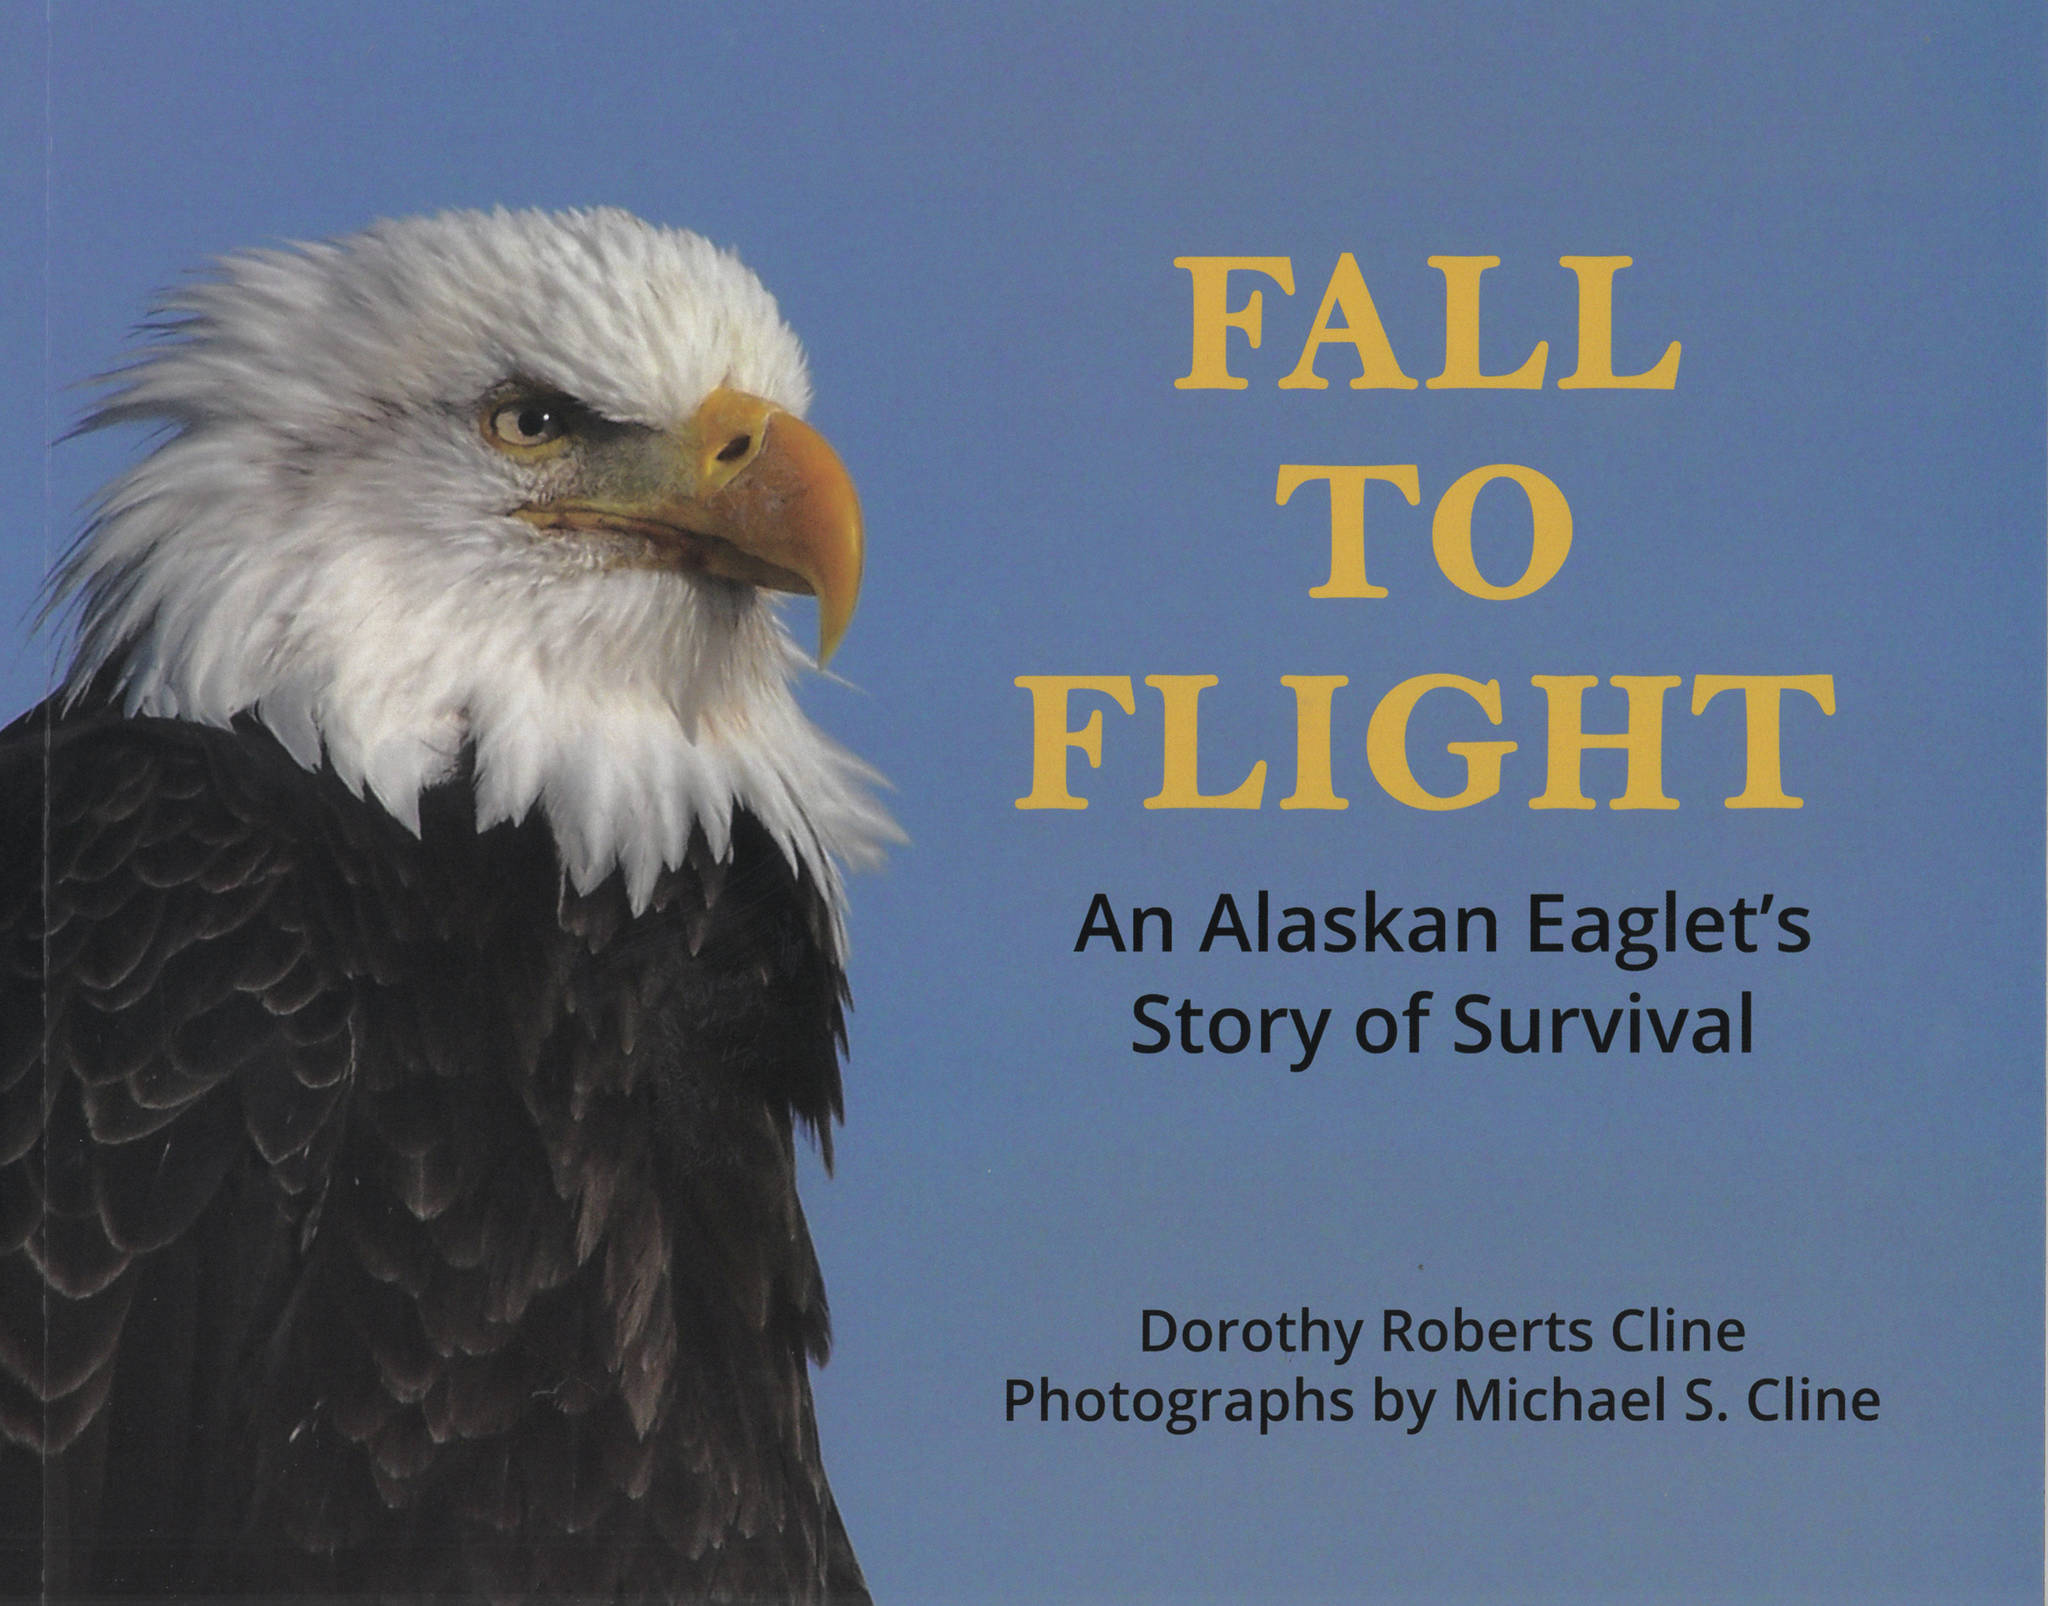 Image courtesy of Dorothy Roberts Cline 
The cover to Dorothy Roberts Cline’s book, “Fall to Flight: An Alaskan Eaglet’s Story of Survival,” uses a photo by the late Michael S. Cline.